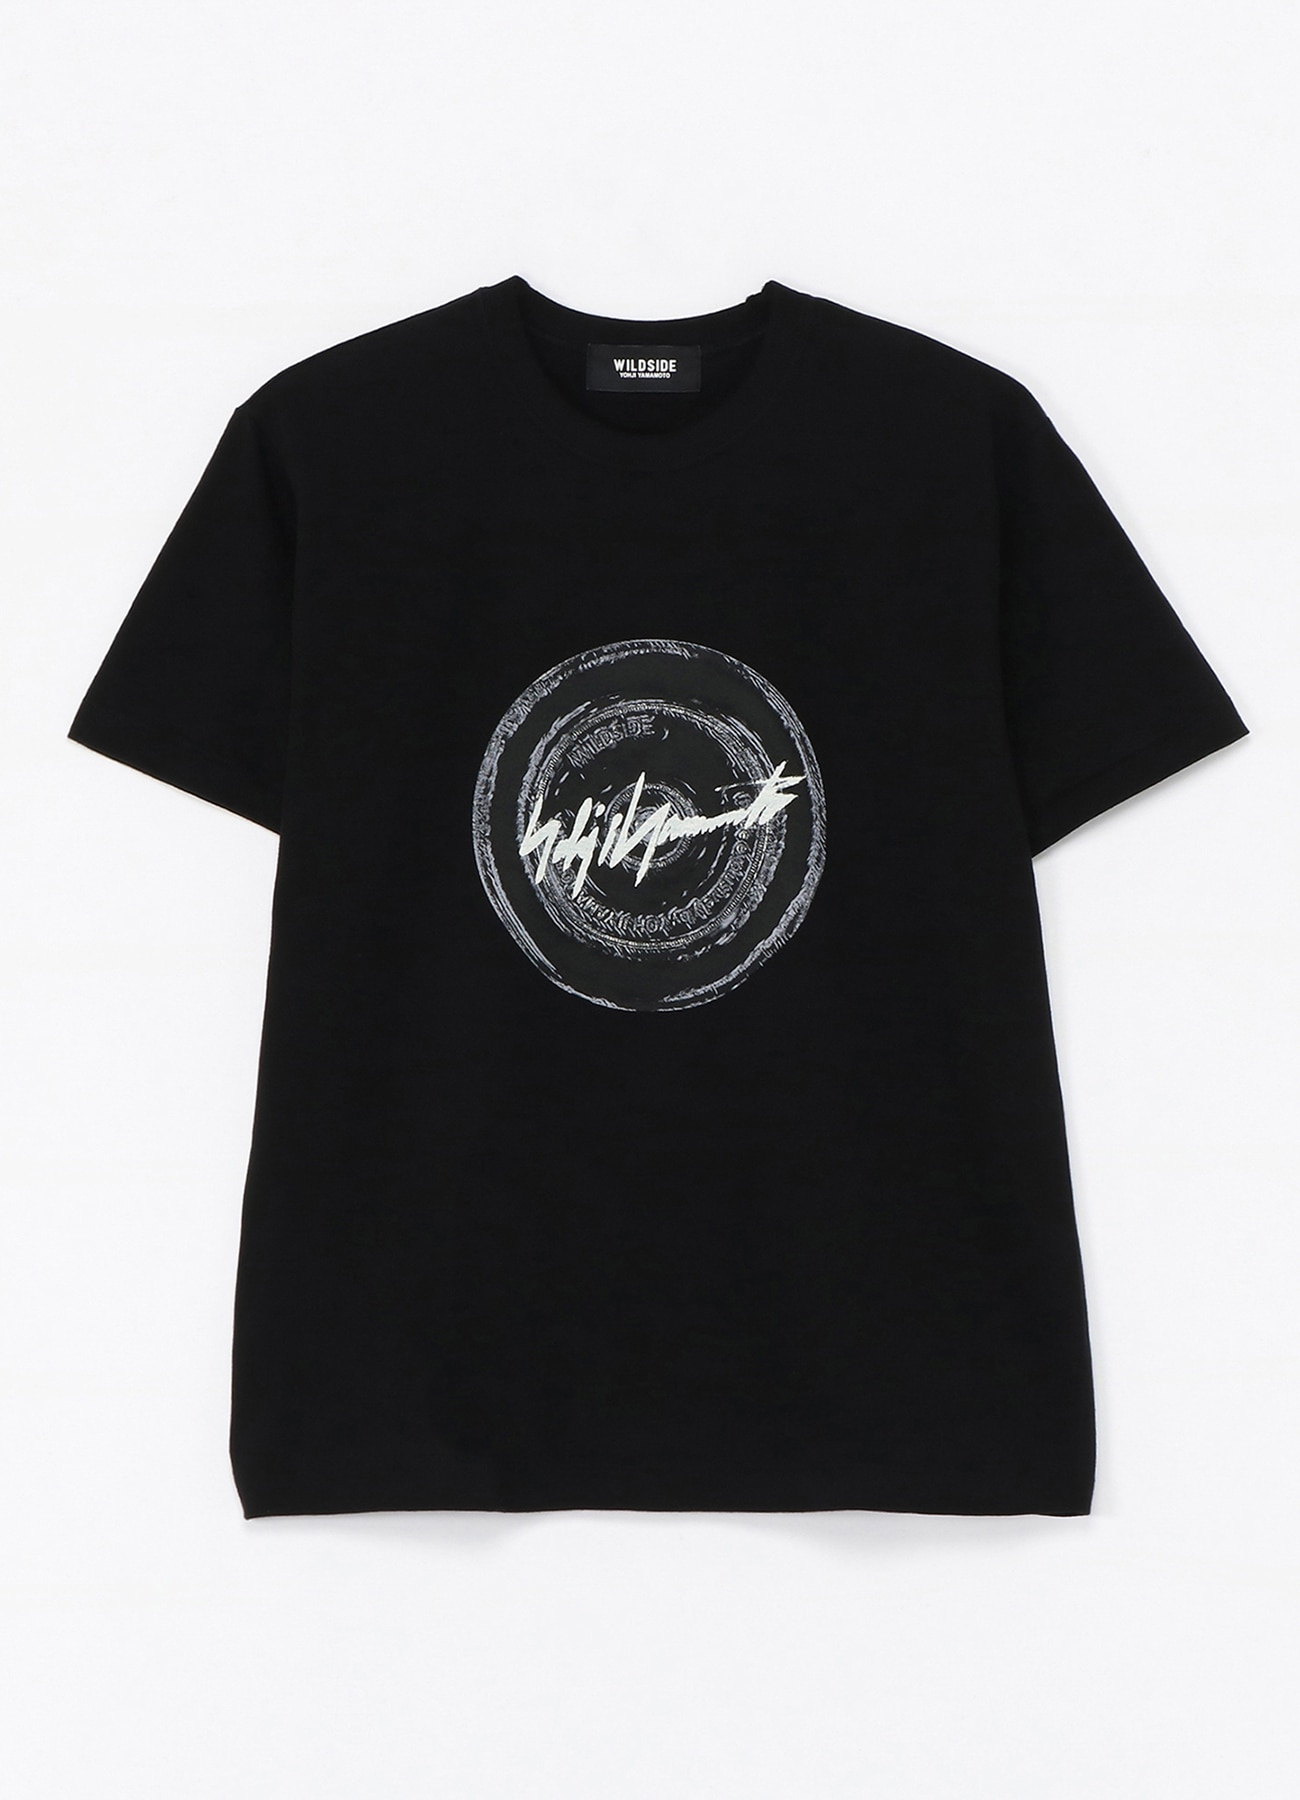 WILDSIDE Record T-shirt